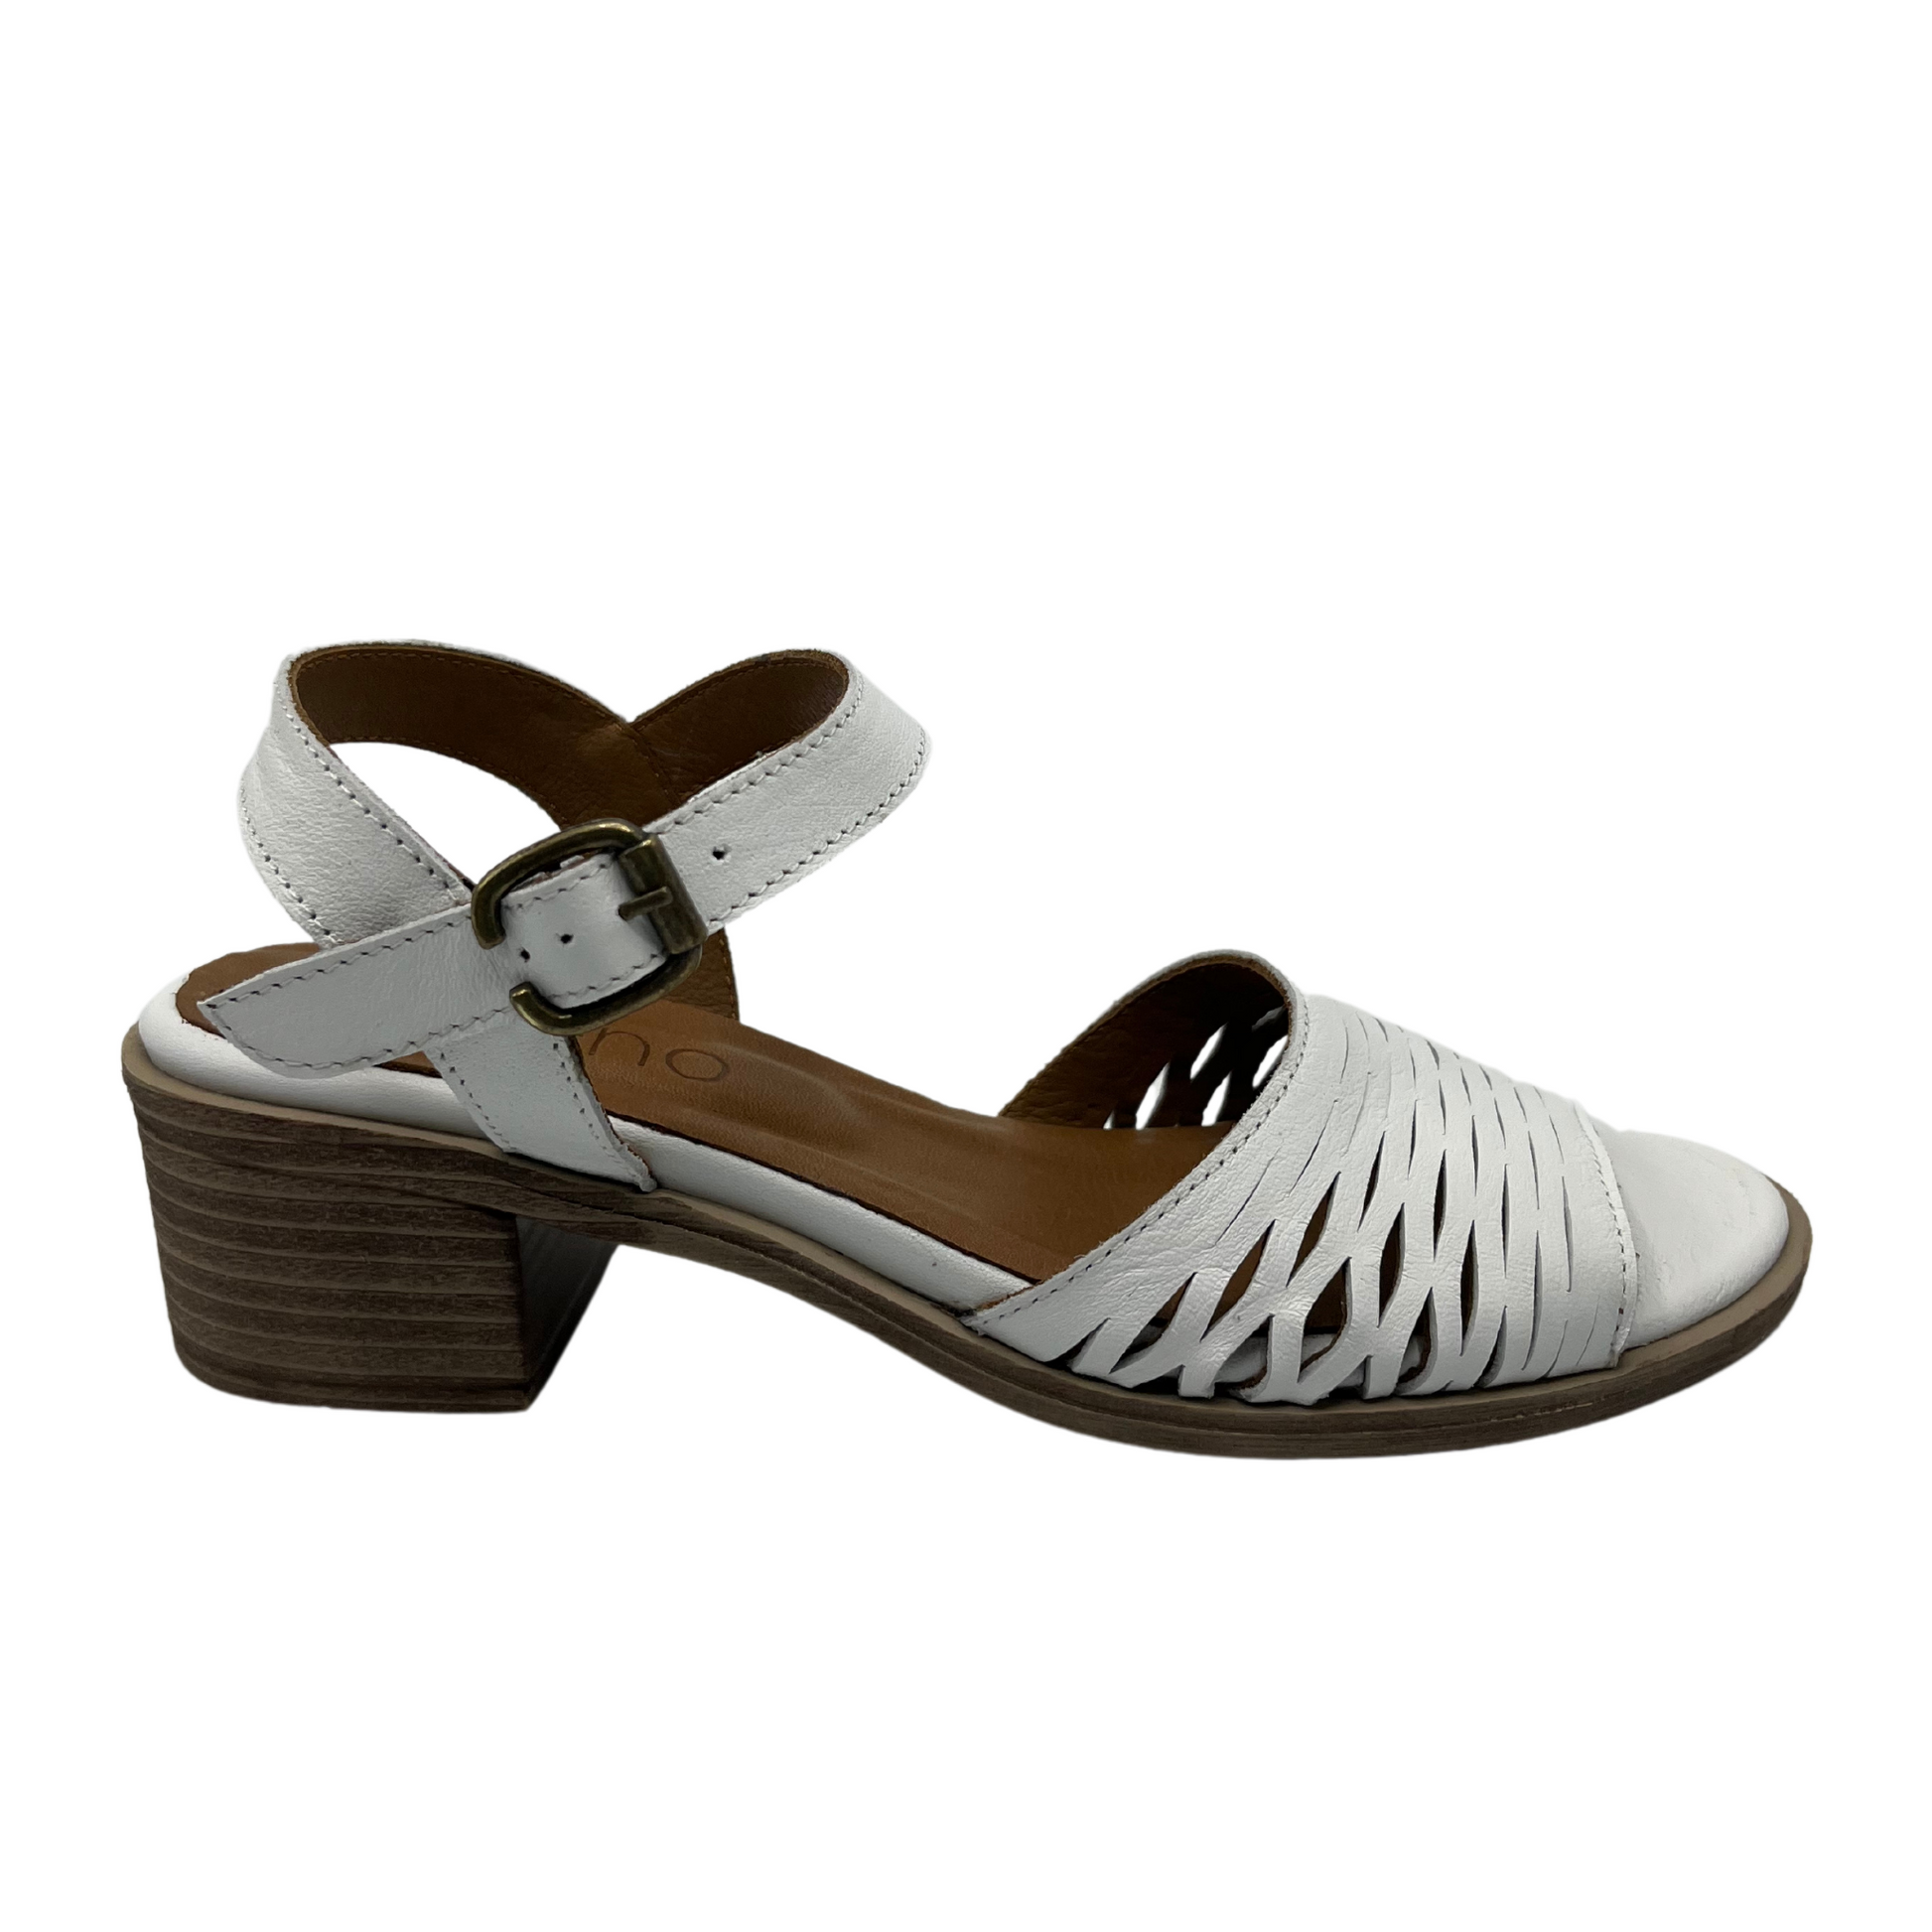 Right facing view of white leather sandal with cutout details and stacked heel